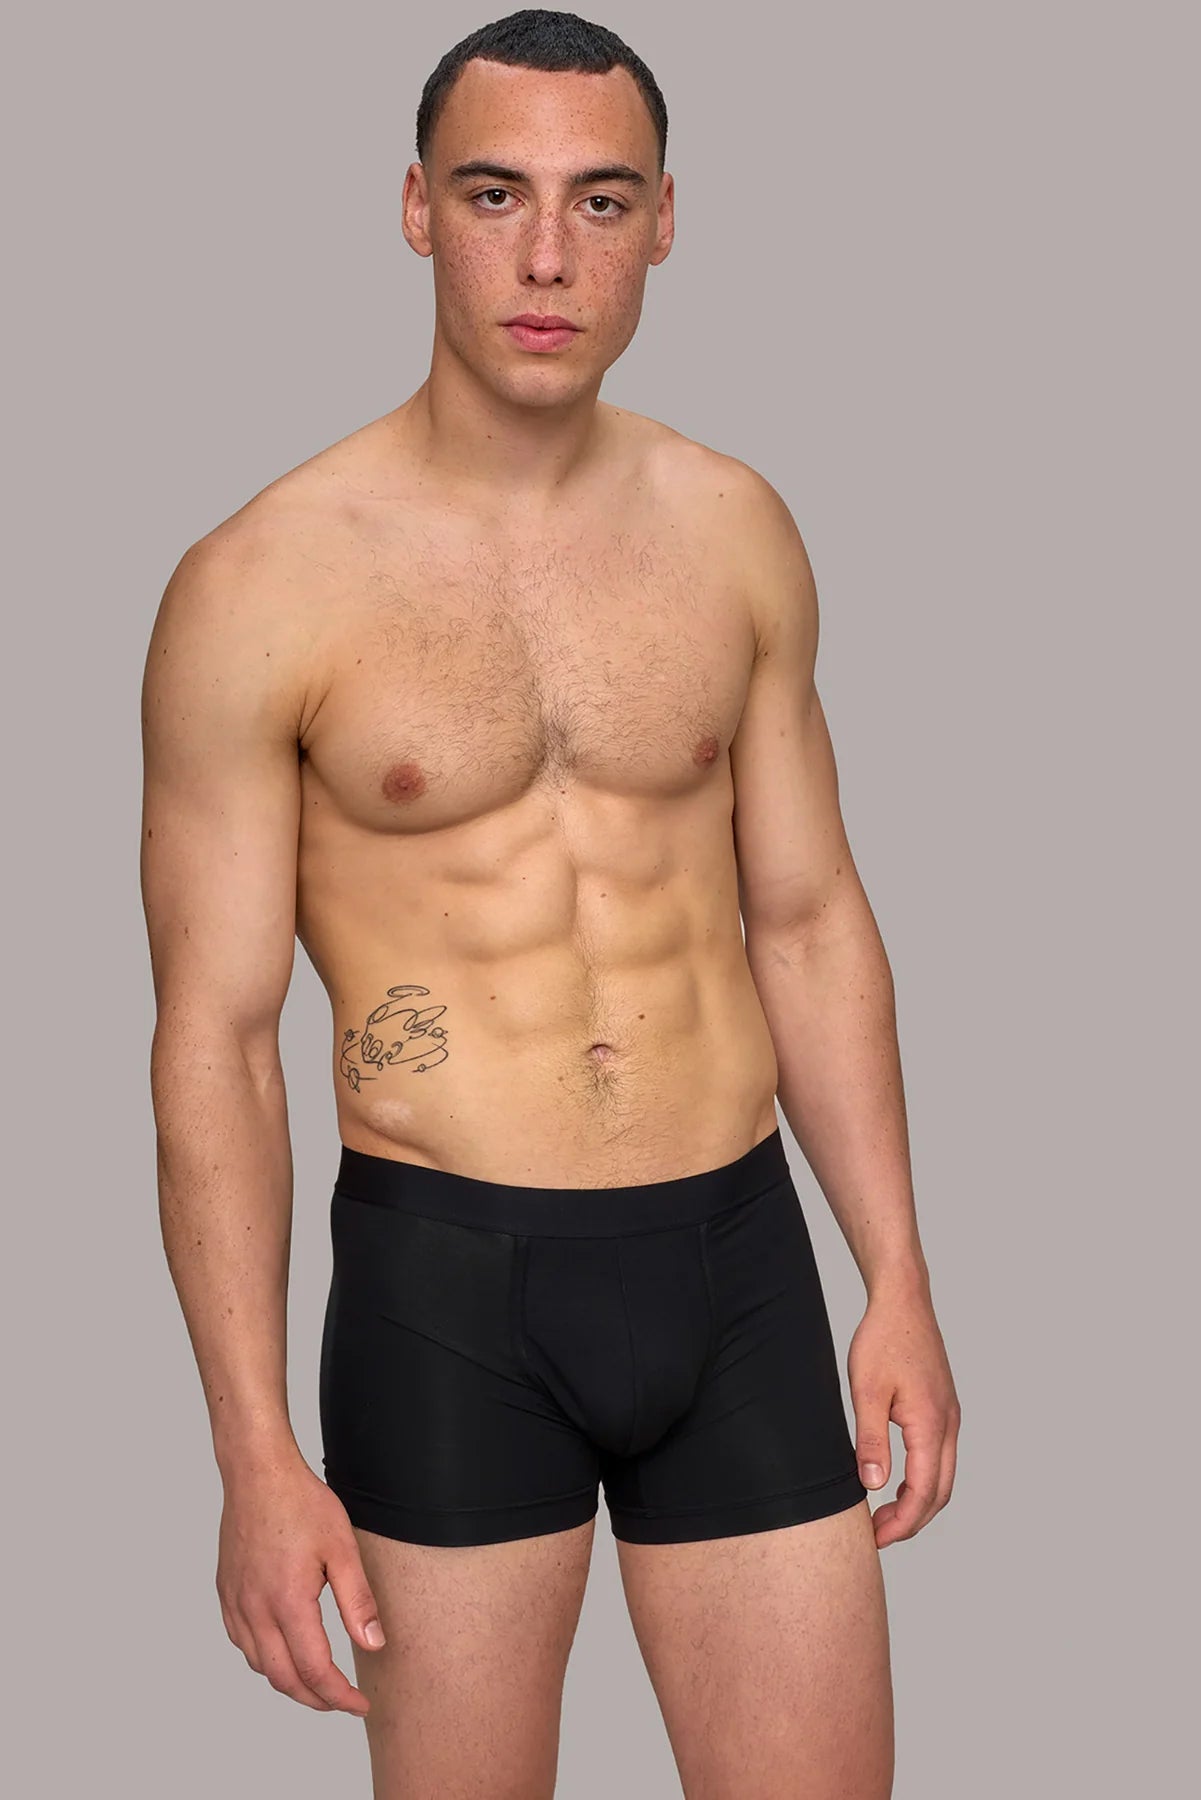 3-pack brief black / sustainable, local, ethical – moi-basics